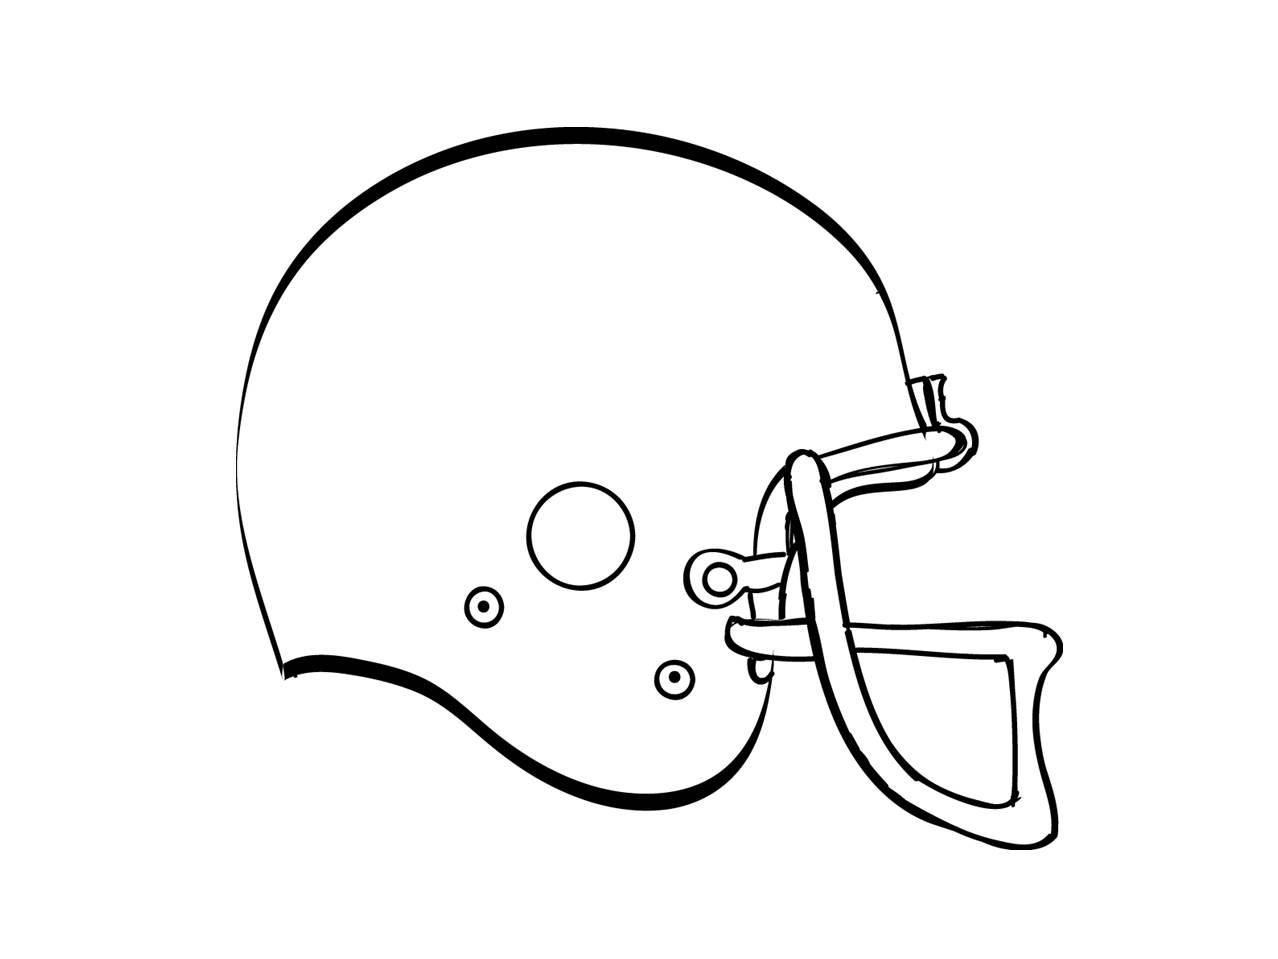 Helmets clipart and football helmets images for you - Cliparting.com